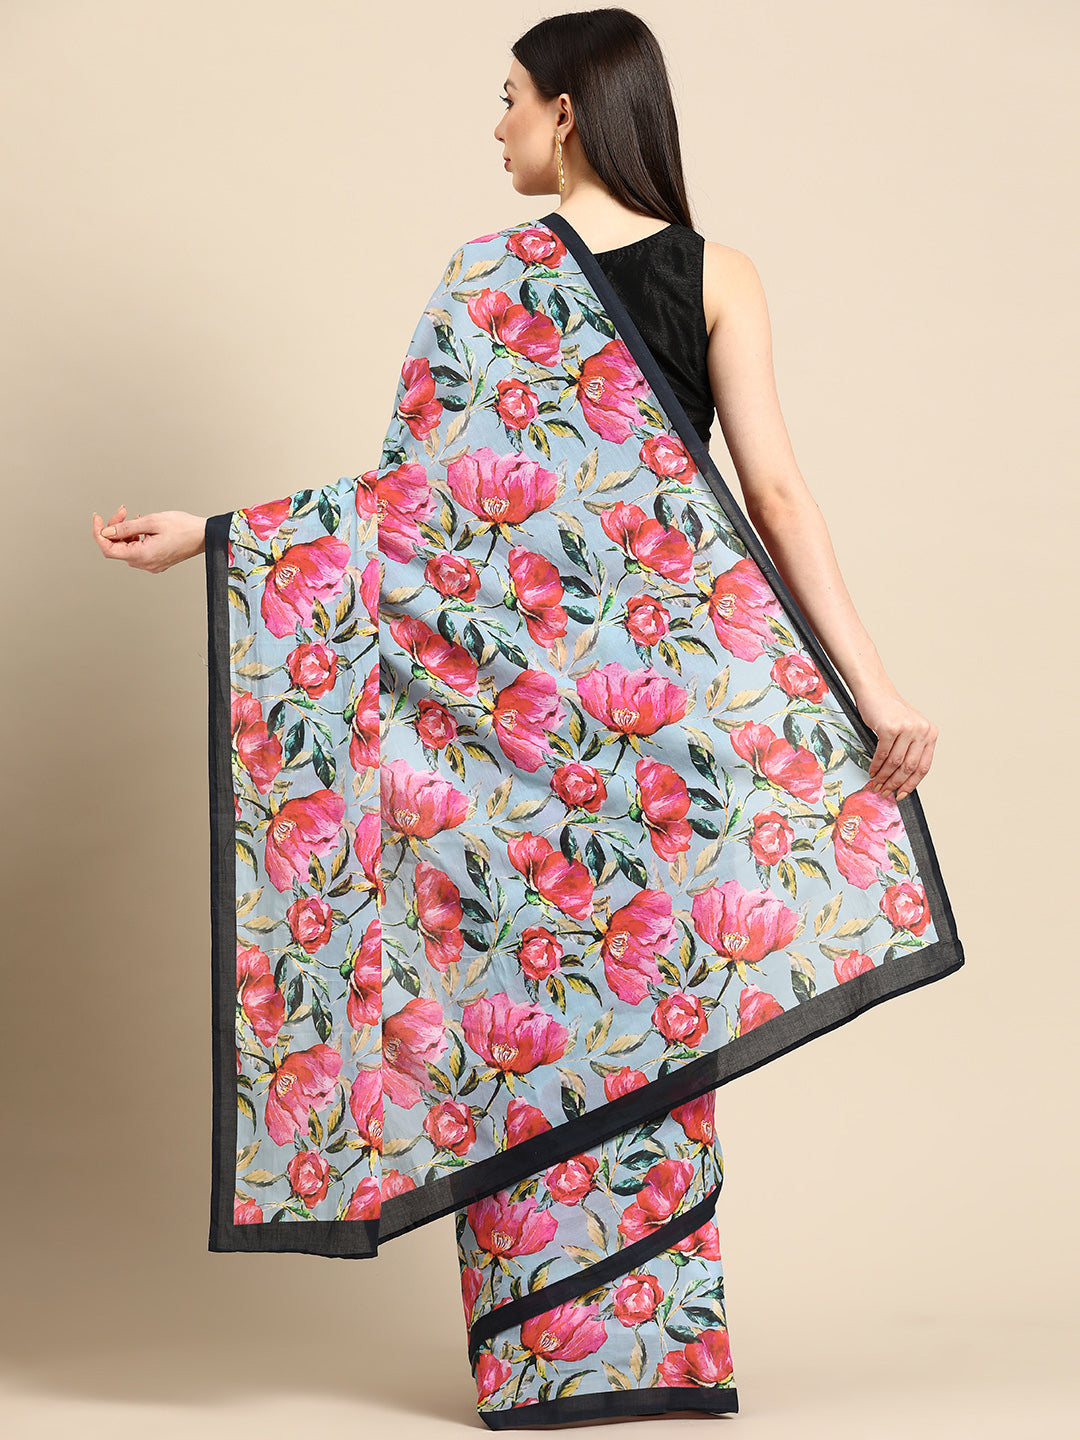 Buta Buti Pink Colour Floral  Printed Pure Cotton Saree With Unstitched Blouse